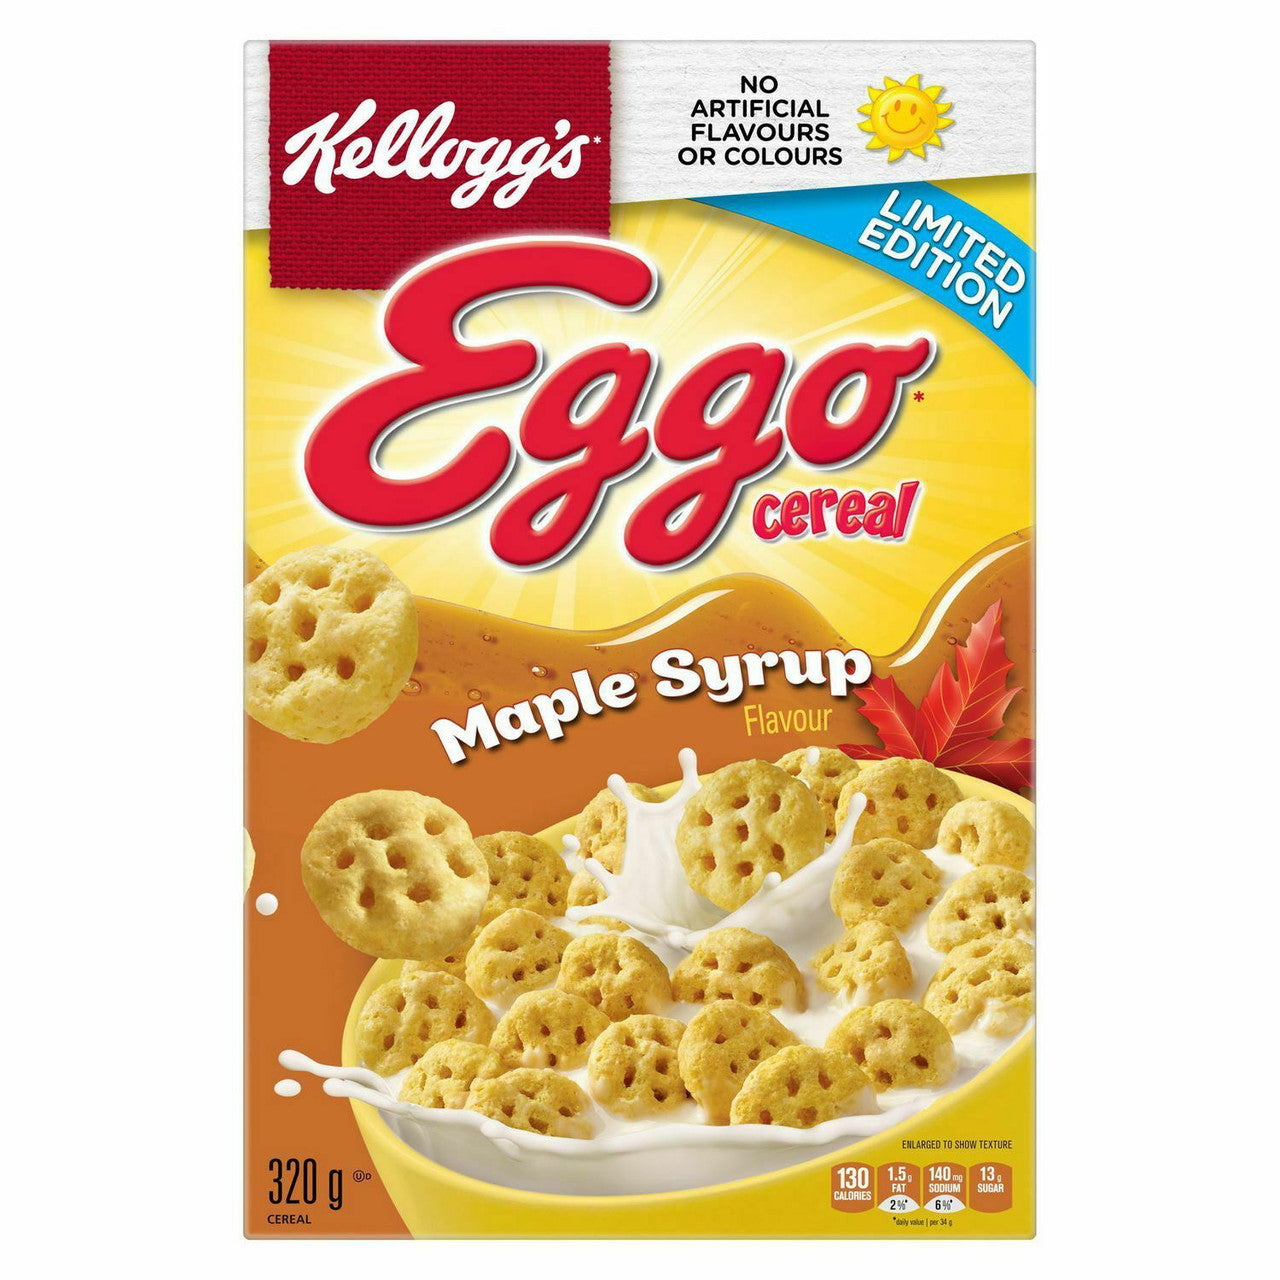 Kellogg's Eggo Maple Syrup Cereal 320g/11.3 oz box {Imported from Canada}